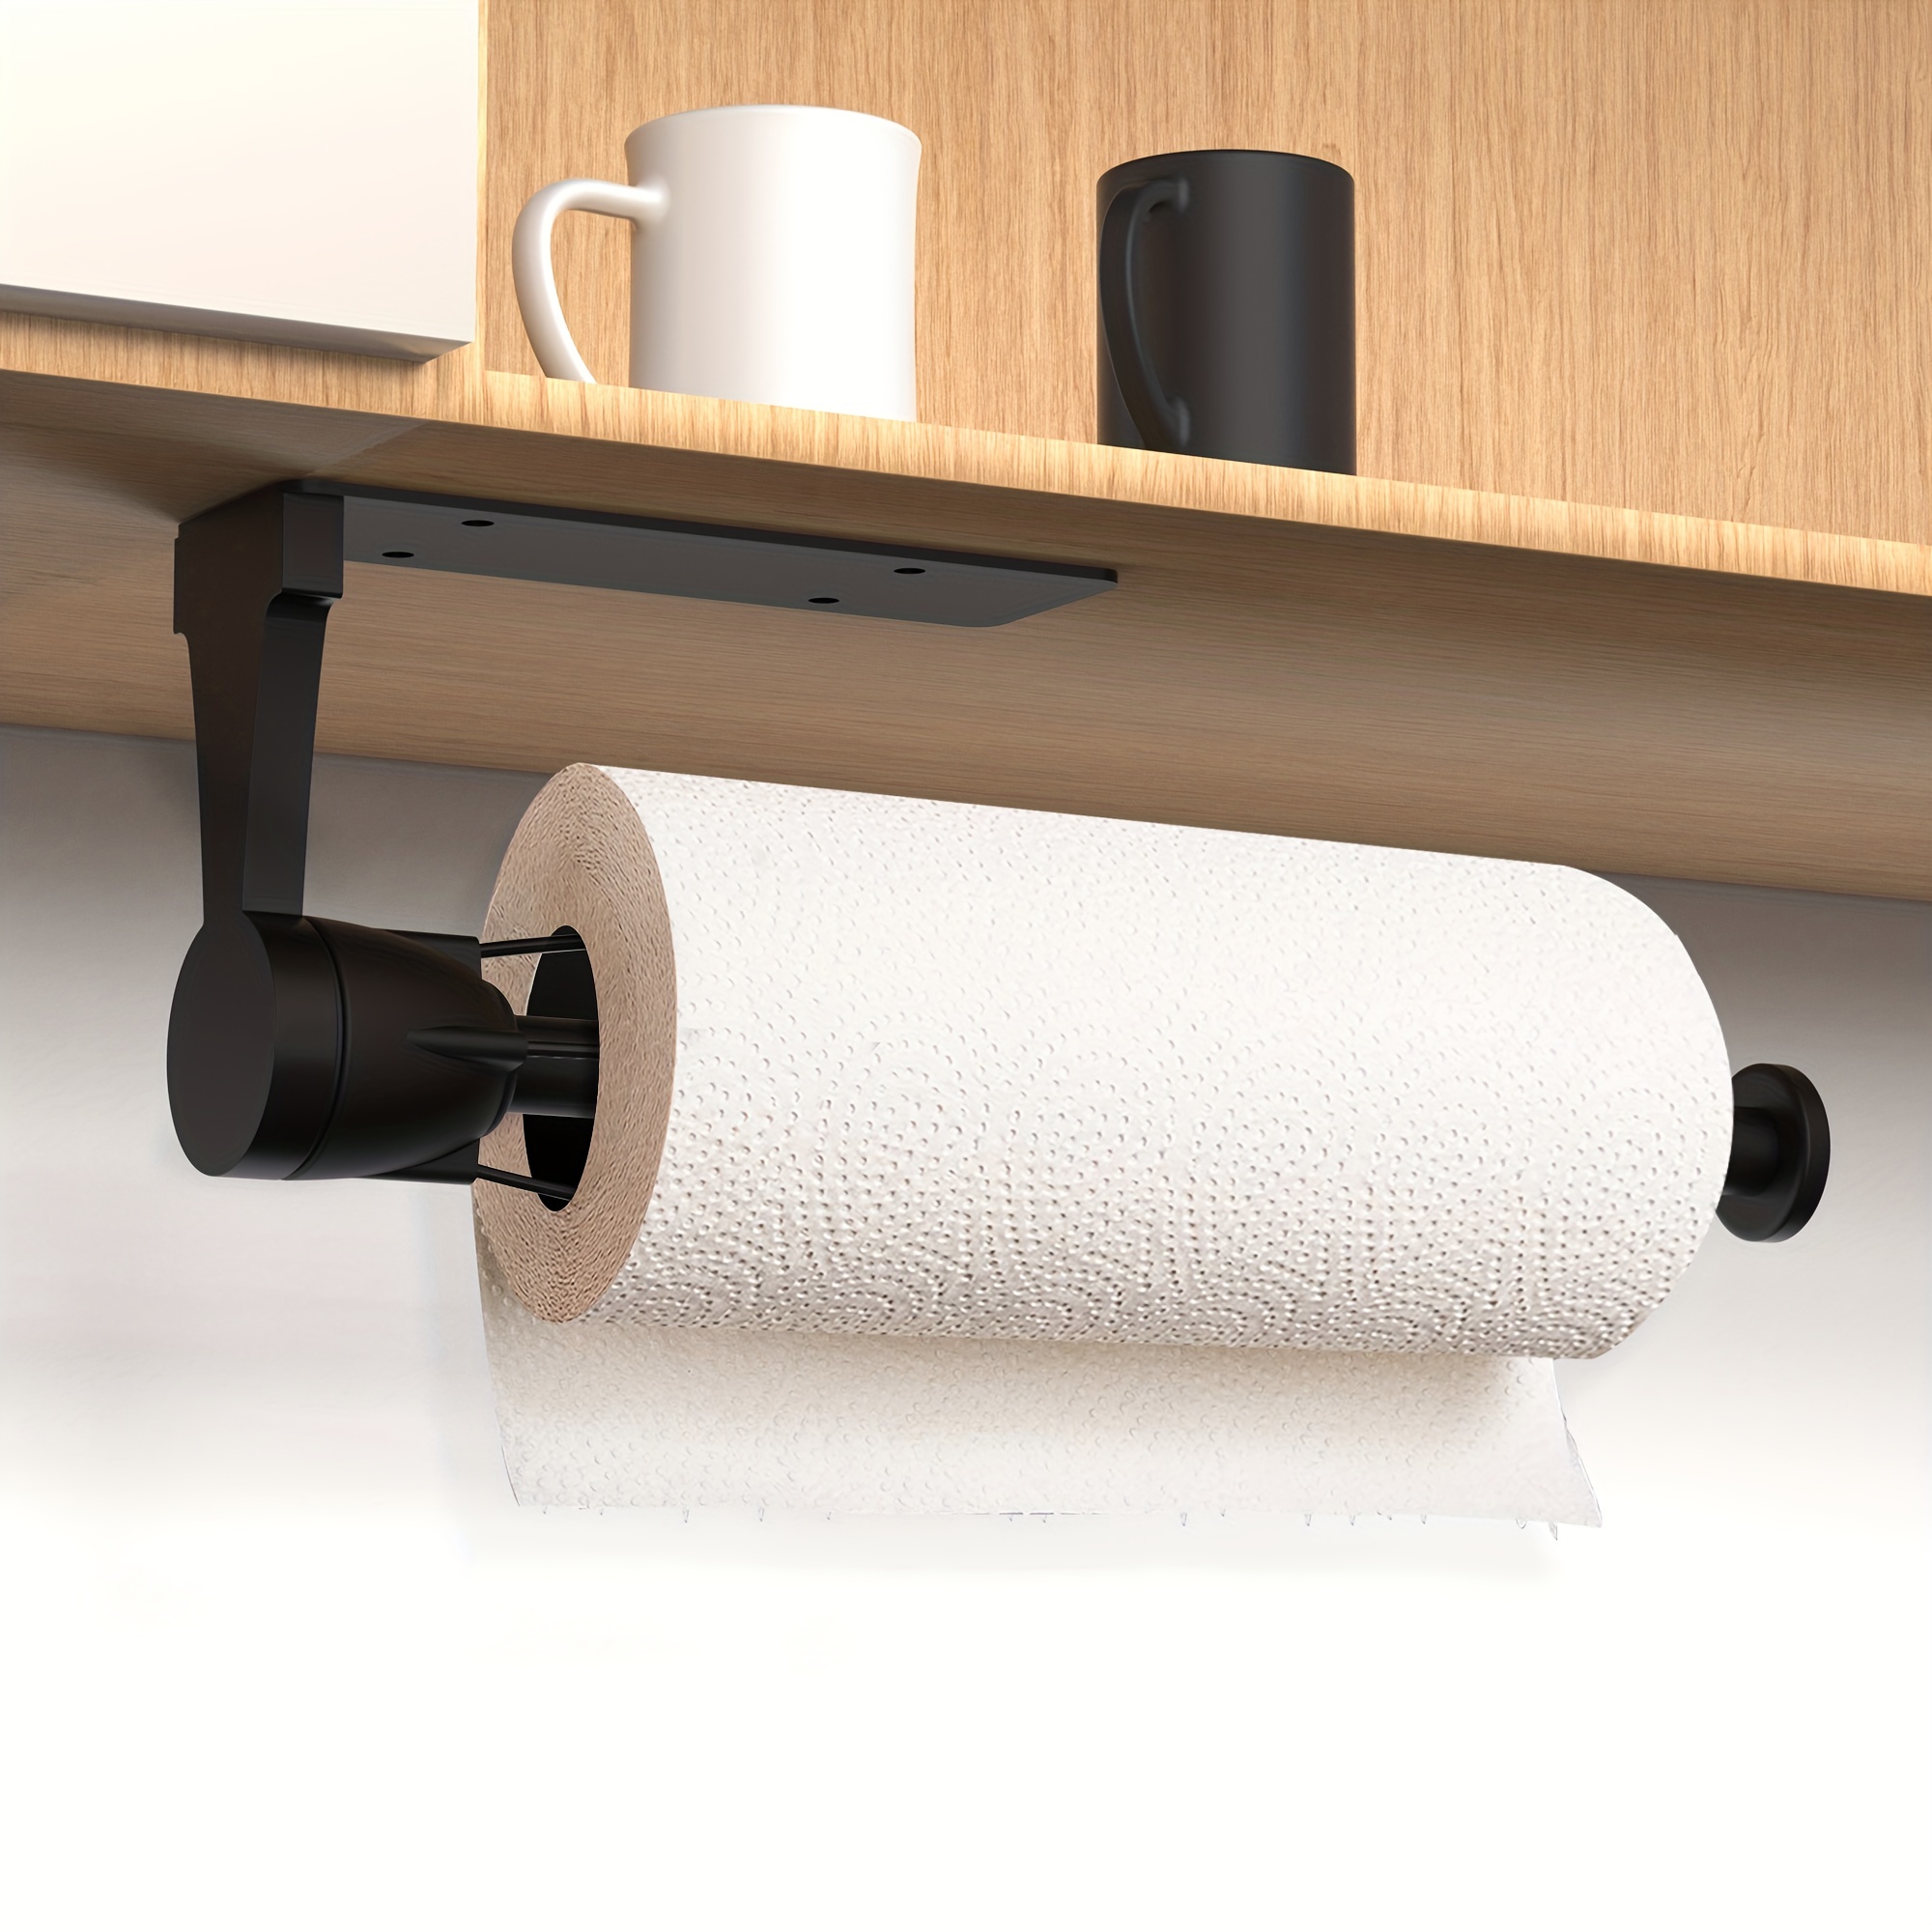 Vehhe Paper Towel Holder Under Cabinet, Perfect Tear Under Counter Paper Towel Holder, Adhesive or Drilling Paper Towel Roll Holder Wall Mount for